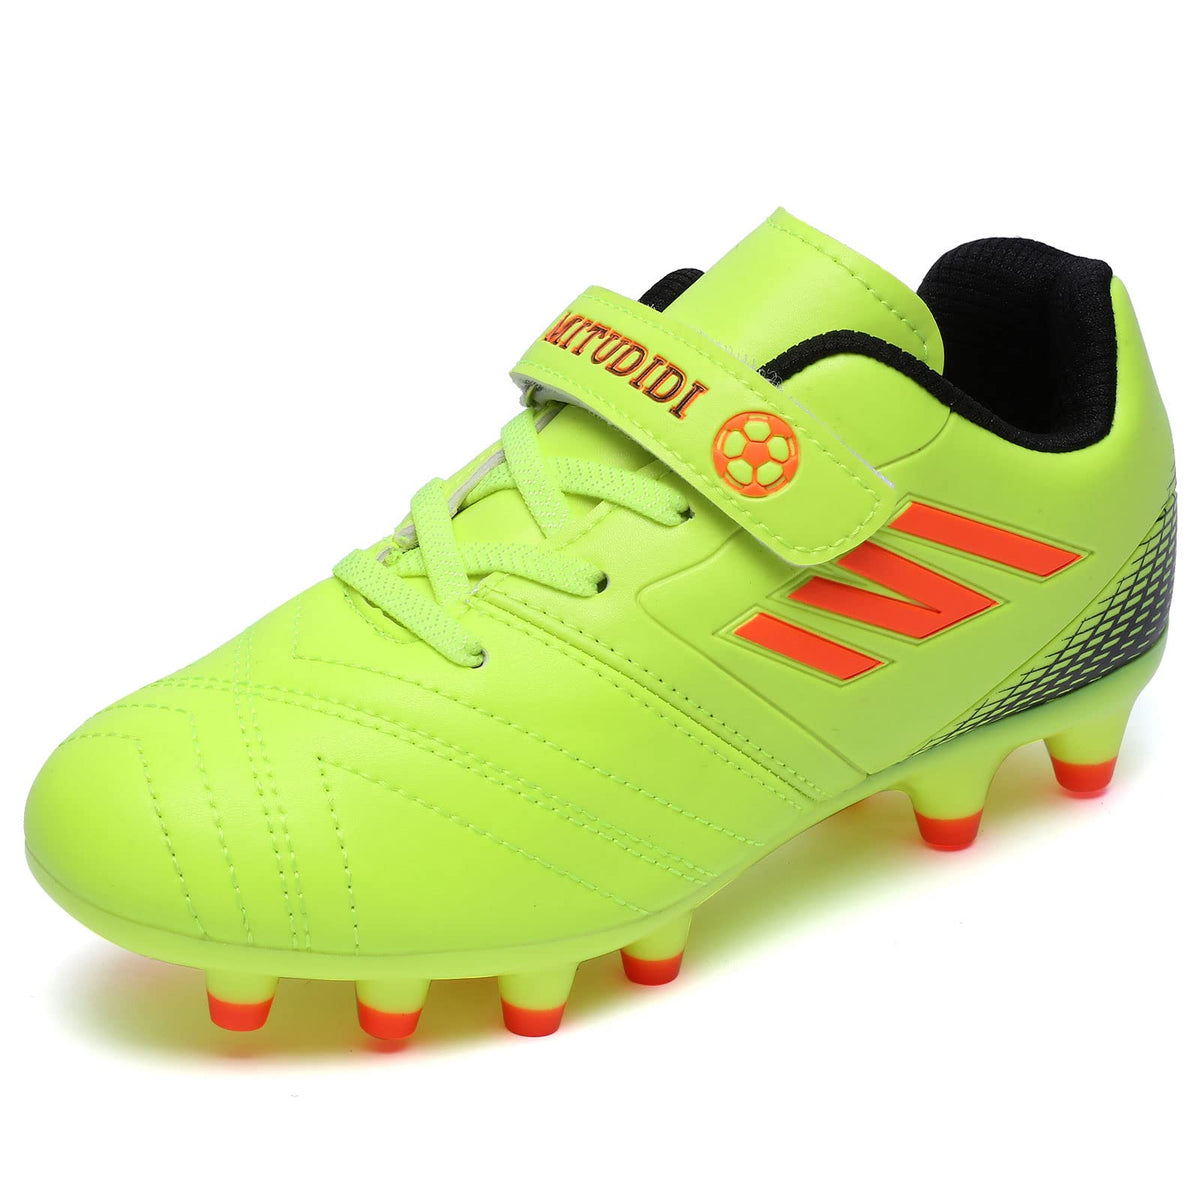 Boys Football Boots Kids Football Boots Girls Football Boots Kids Astro Turf Football Boots Football Boots for Kids Boys Fashion Athletic Trainers Green 11